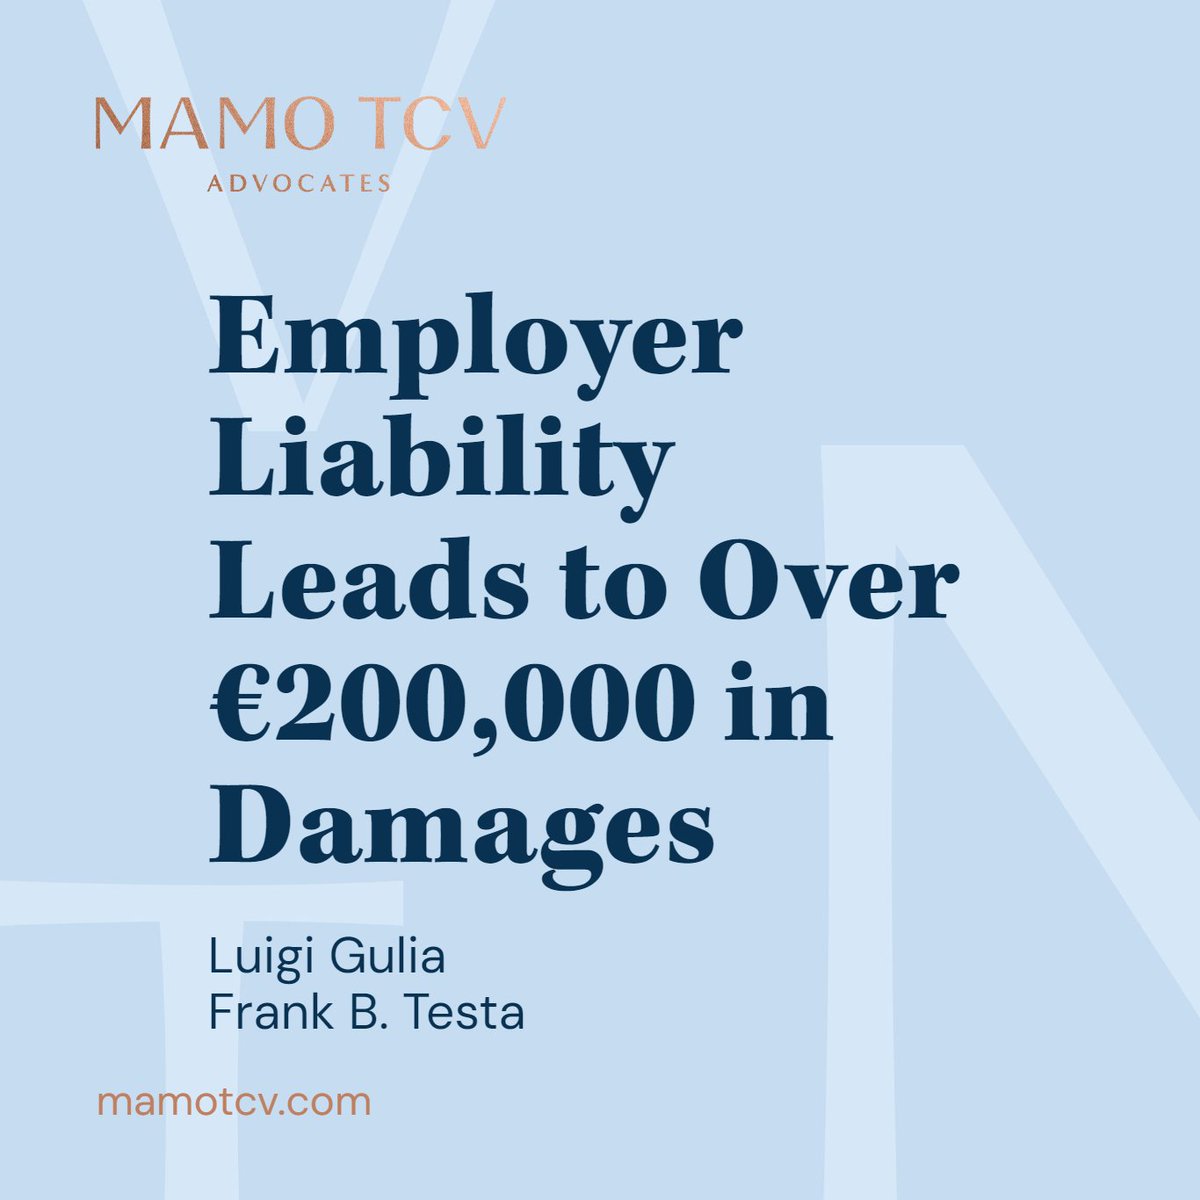 Find out more in the article by Luigi Gulia and Frank B. Testa 
mamotcv.com/insights/emplo…

#litigation #damages #employerliability #contractandtort #mamotcv